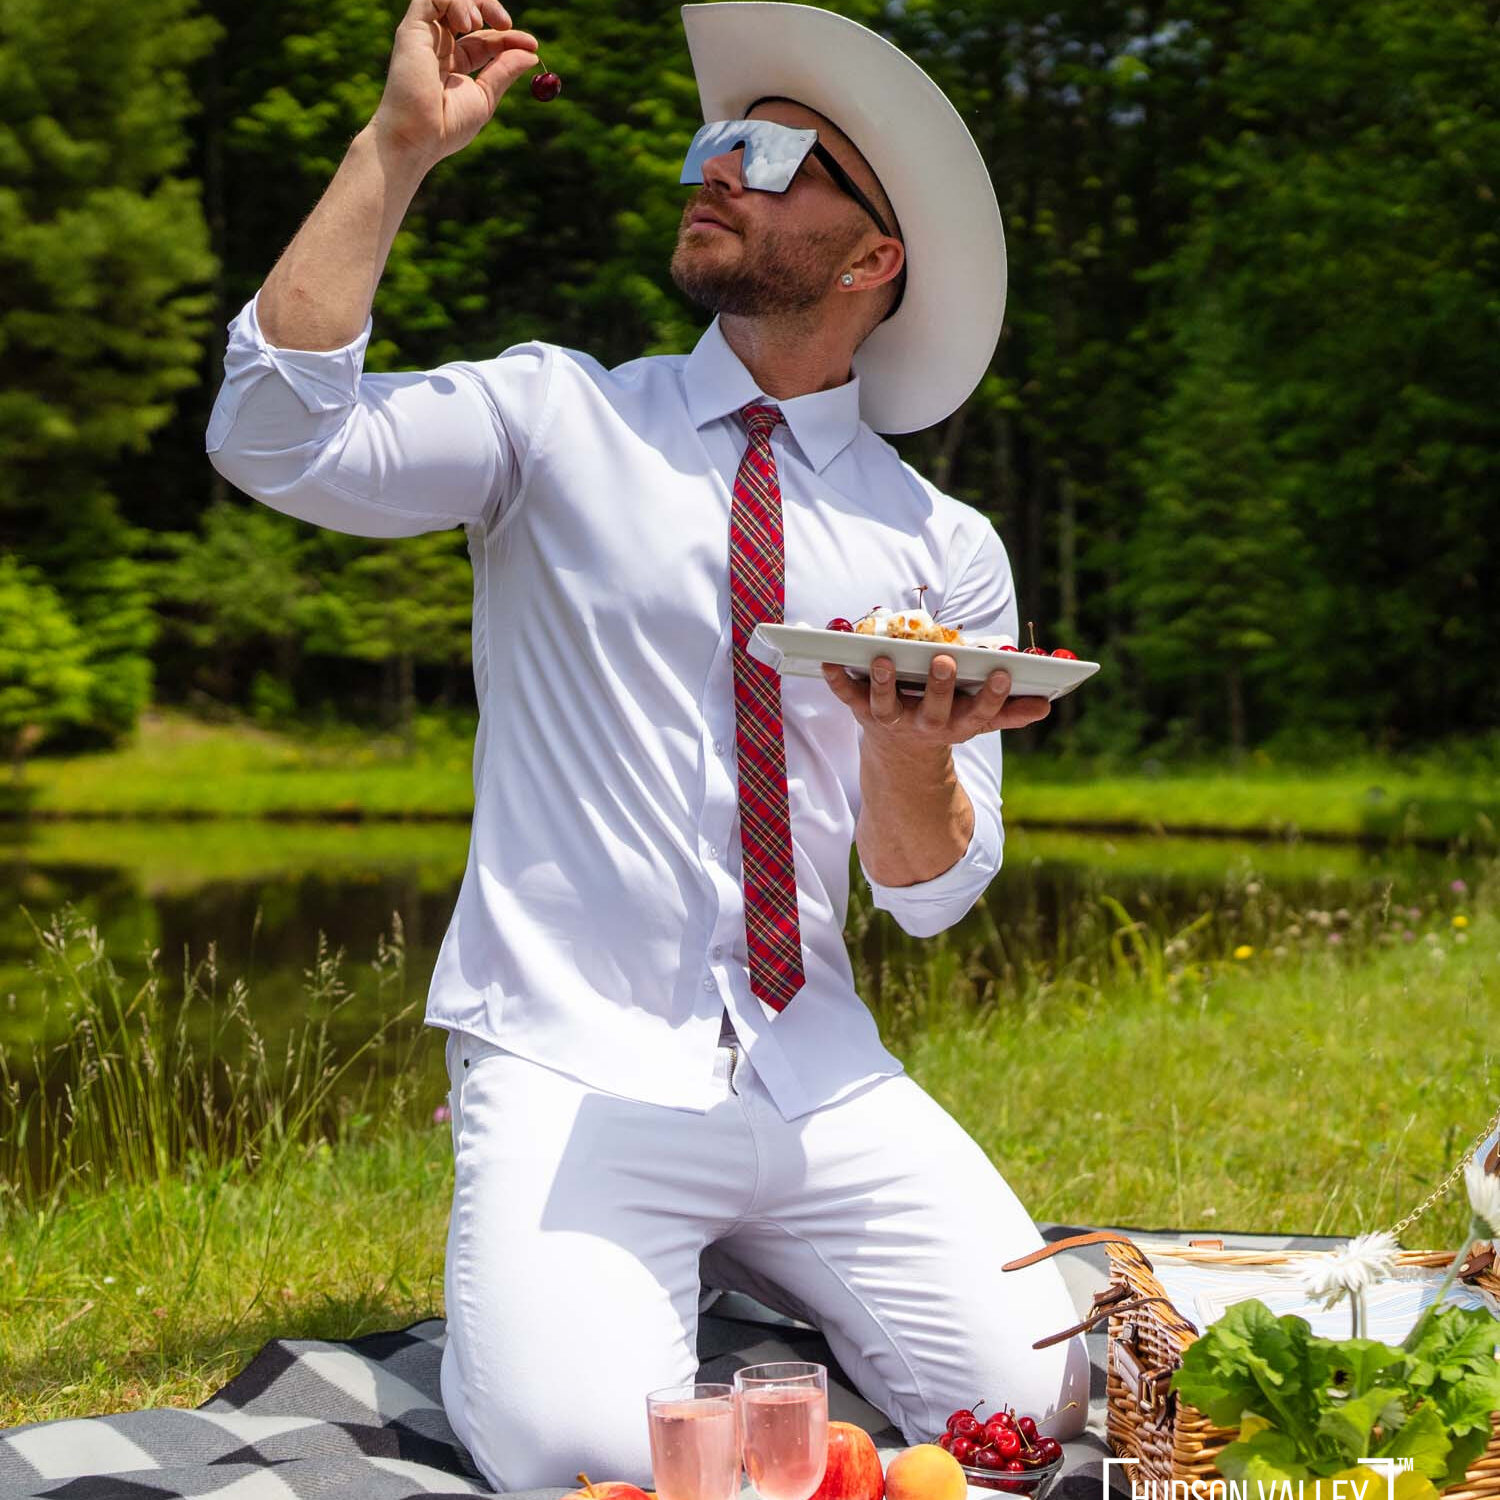 Picnic Perfection in the Hudson Valley: A Guide with Maxwell Alexander – LGBTQ Travel in the Hudson Valley and Catskills – Luxury Hospitality Lifestyle Photography by Alluvion Media – Presented by Alluvion Vacations